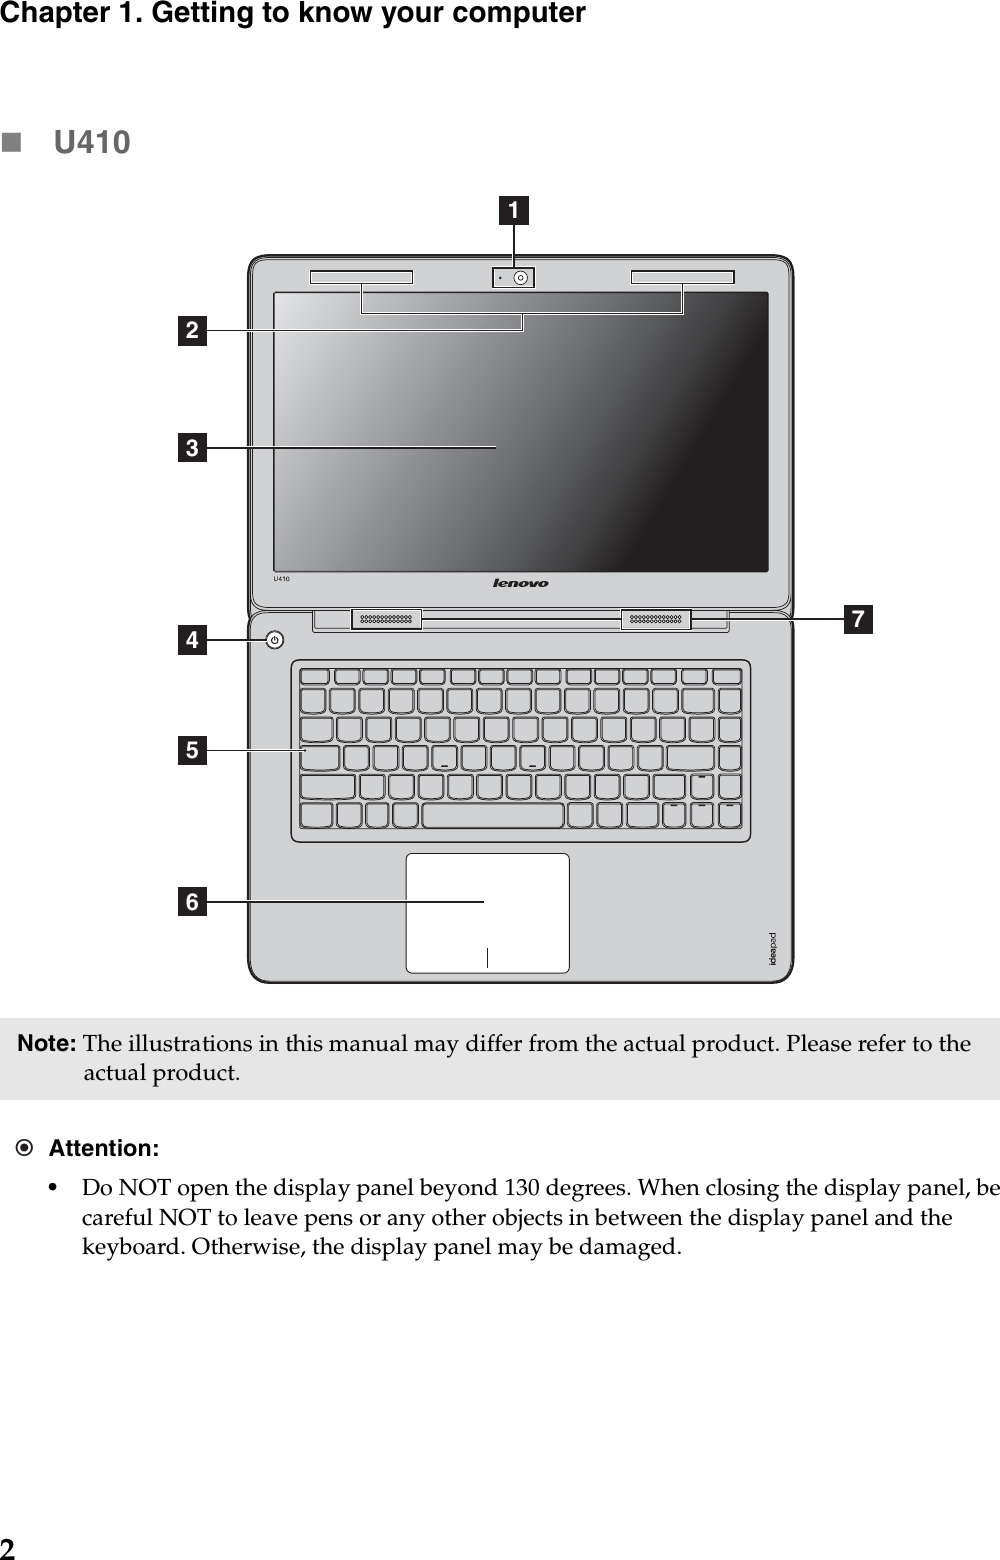 2Chapter 1. Getting to know your computerU410Note: The illustrations in this manual may differ from the actual product. Please refer to the actual product. Attention:•Do NOT open the display panel beyond 130 degrees. When closing the display panel, be careful NOT to leave pens or any other objects in between the display panel and the keyboard. Otherwise, the display panel may be damaged.1237465